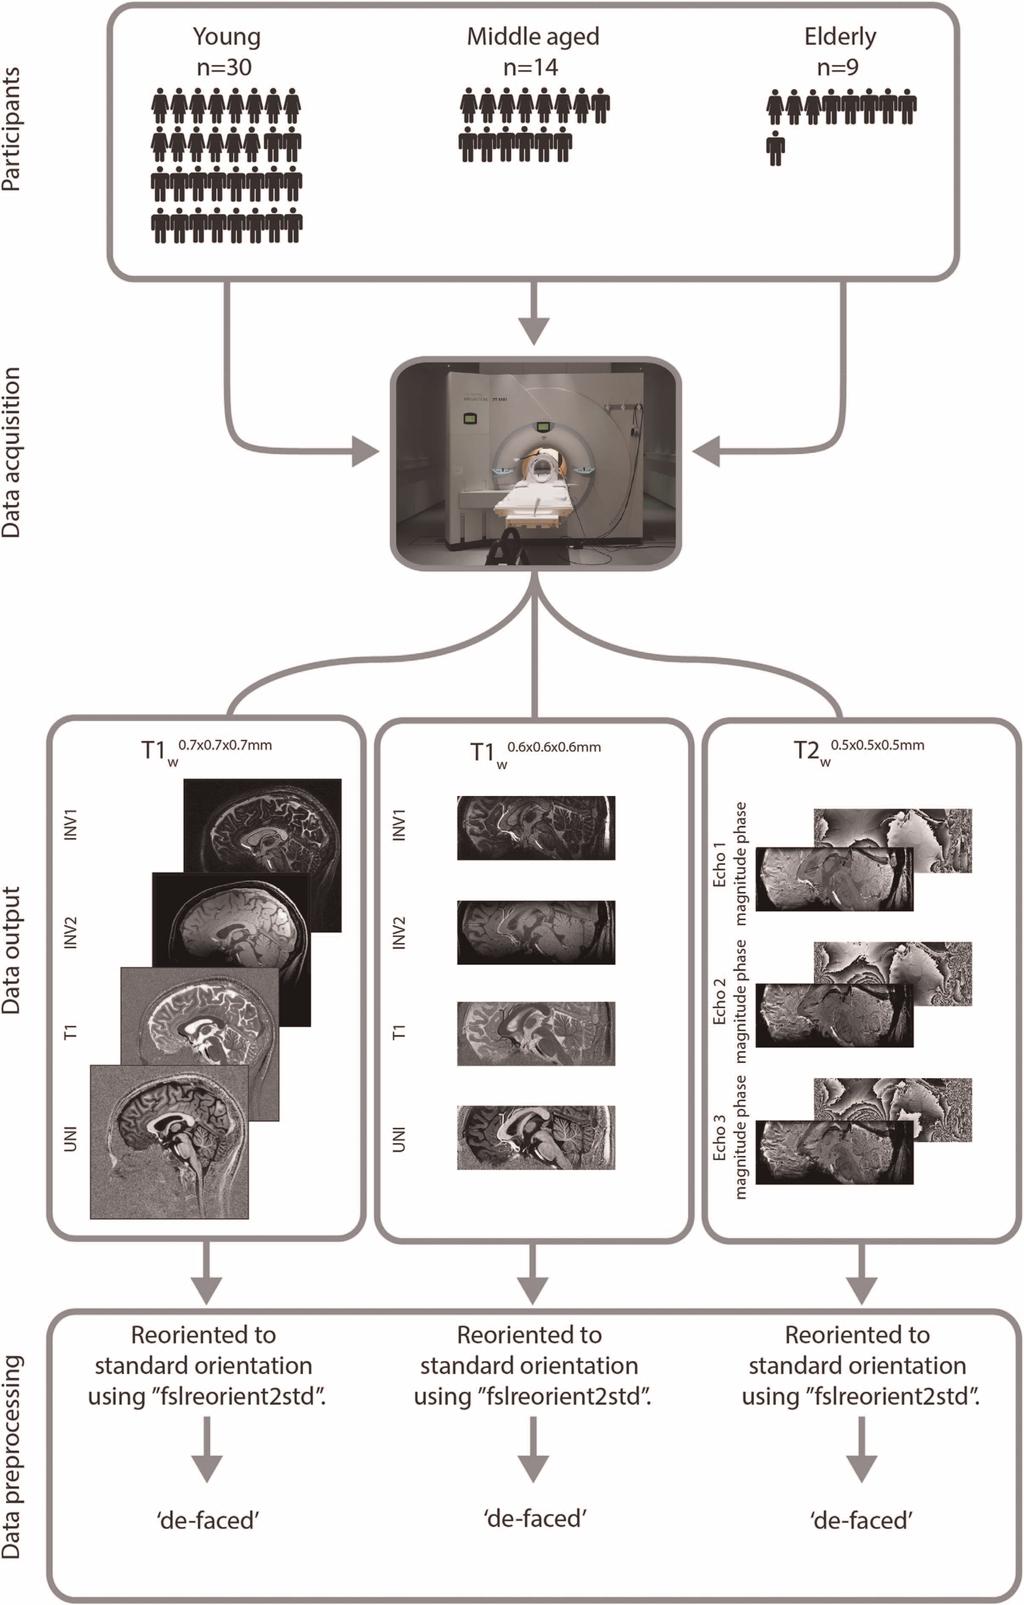 Figure 1. Data acquisition workflow. Three different age groups were structurally scanned using a 7 T MRI scanner.